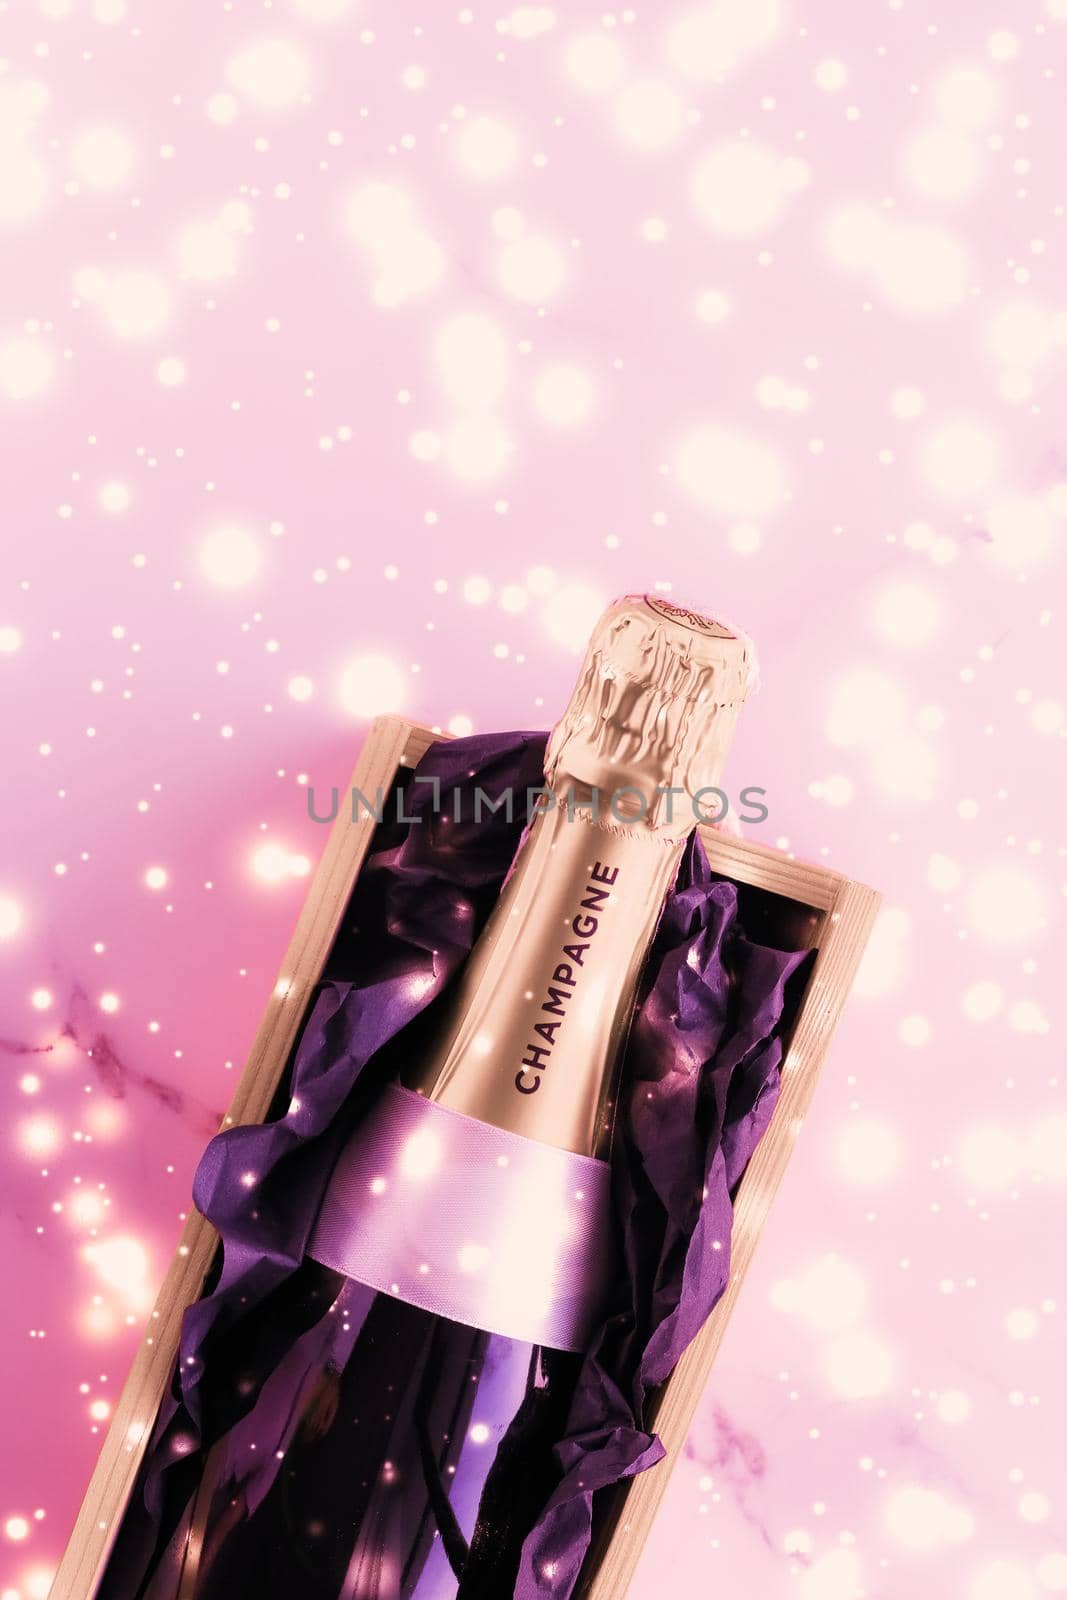 Celebration, drinks and branding concept - Champagne bottle and gift box on pink holiday glitter, New Years, Christmas, Valentines Day, winter present and luxury product packaging for beverage brand